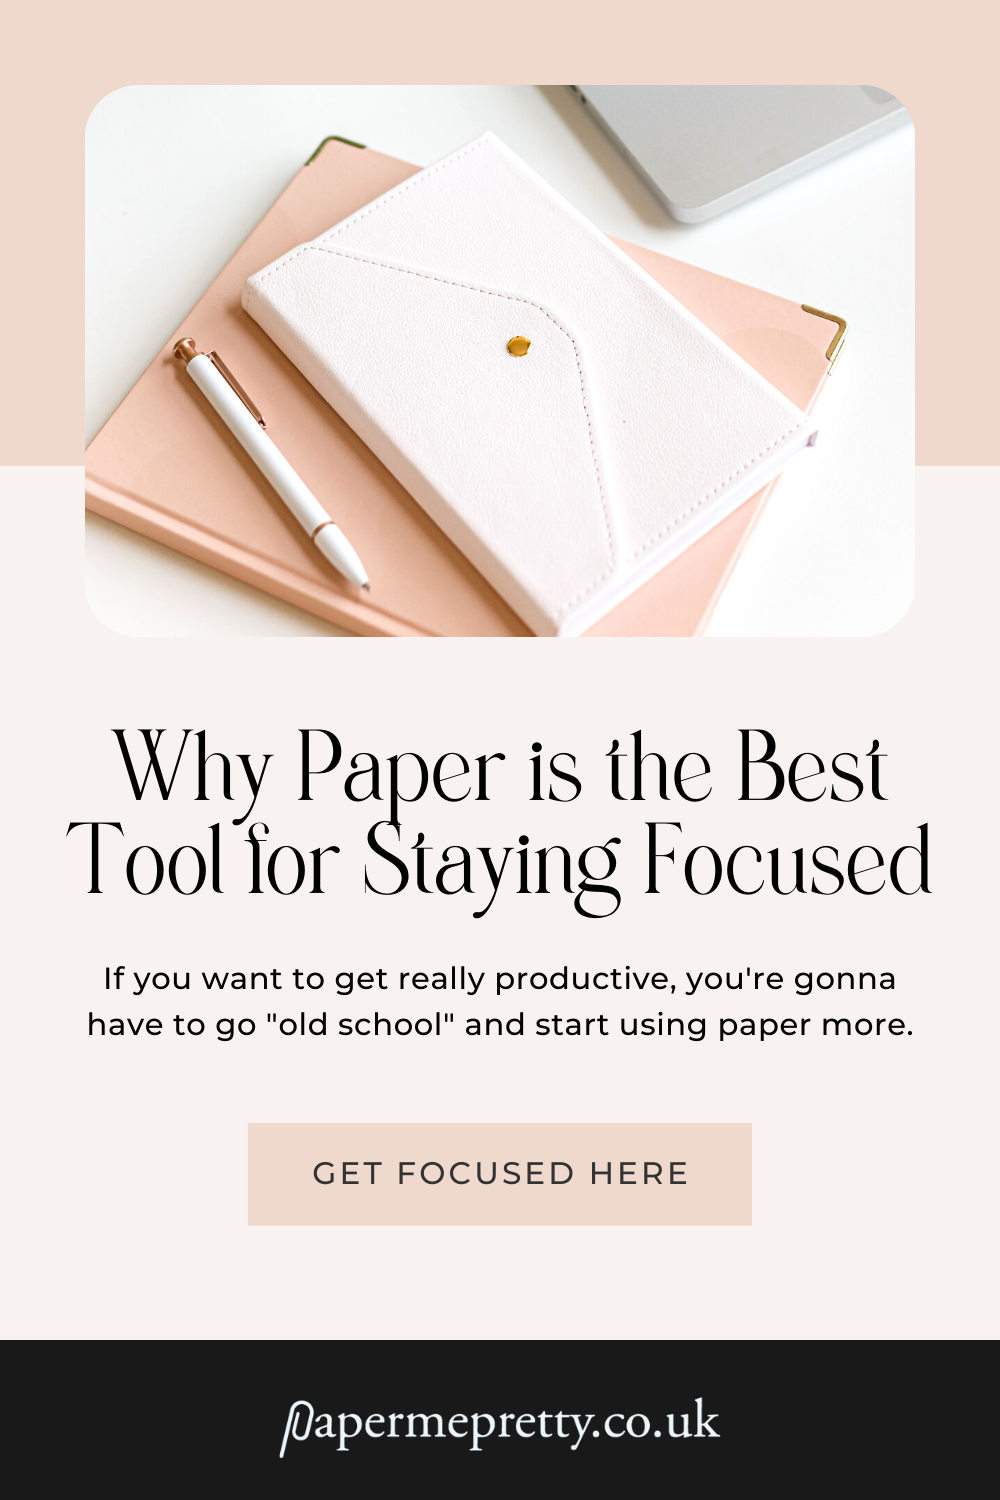 Ready to unleash your most productive self? 🚀 It's time to say goodbye to your phone and hello to paper! If you're looking to unleash your most productive self, you'll need to ditch your phone. Find out why paper will help you to focus better and get more done inside this post. #FlowState #StayFocused #productivity #focus